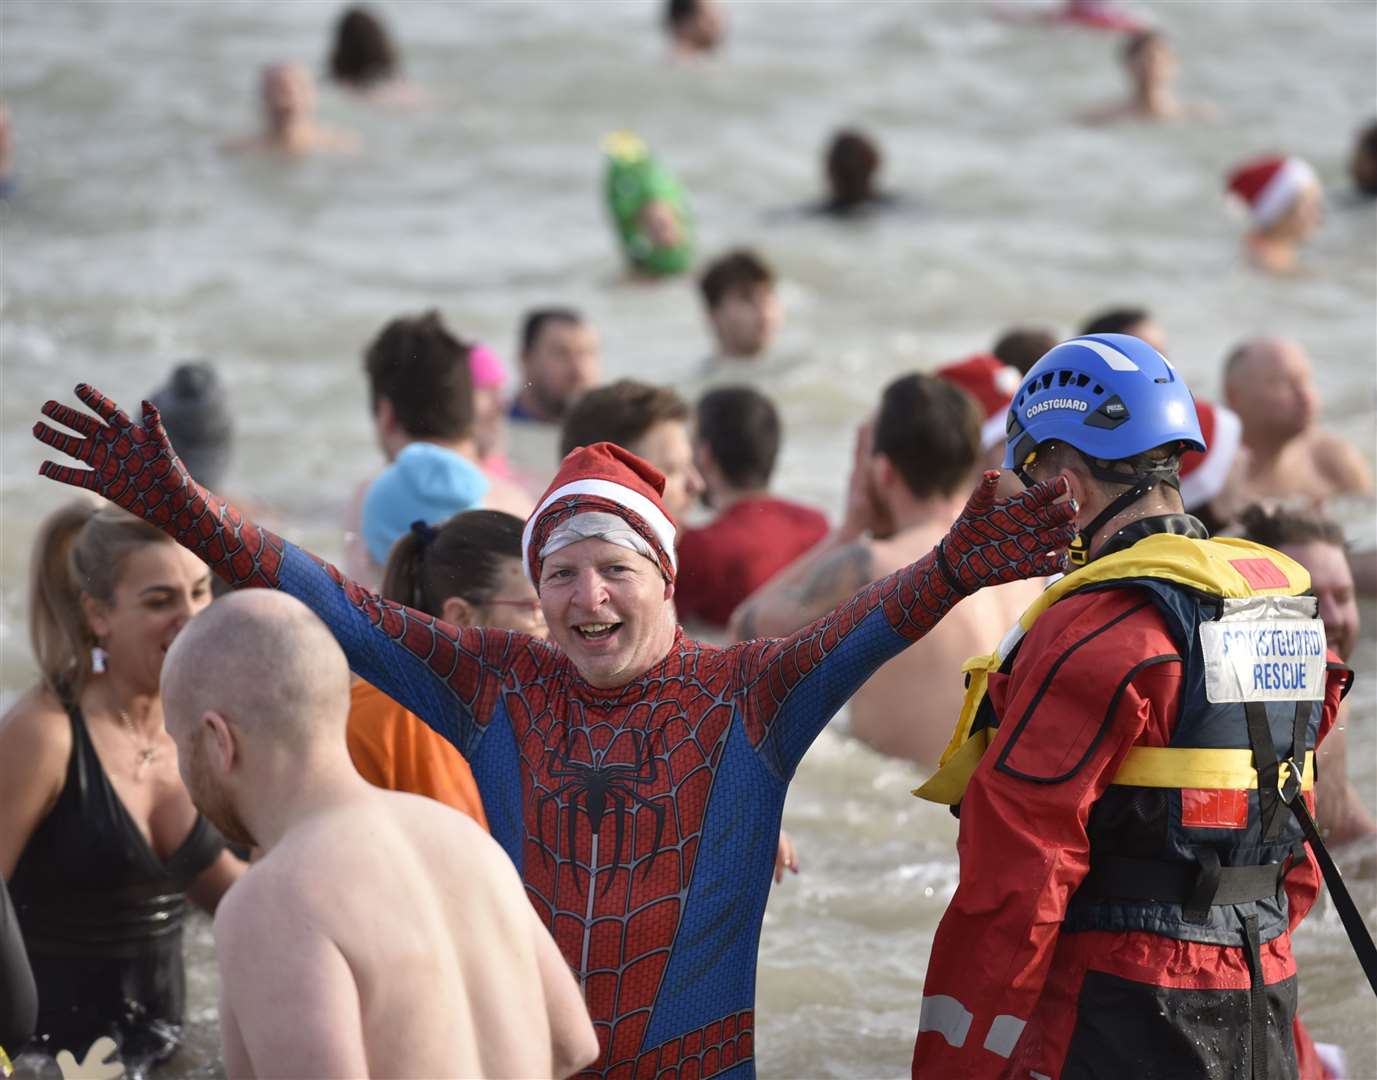 Spiderman among the swimmers in Deal. Picture: Carol Fenton/The Unofficial Photographer